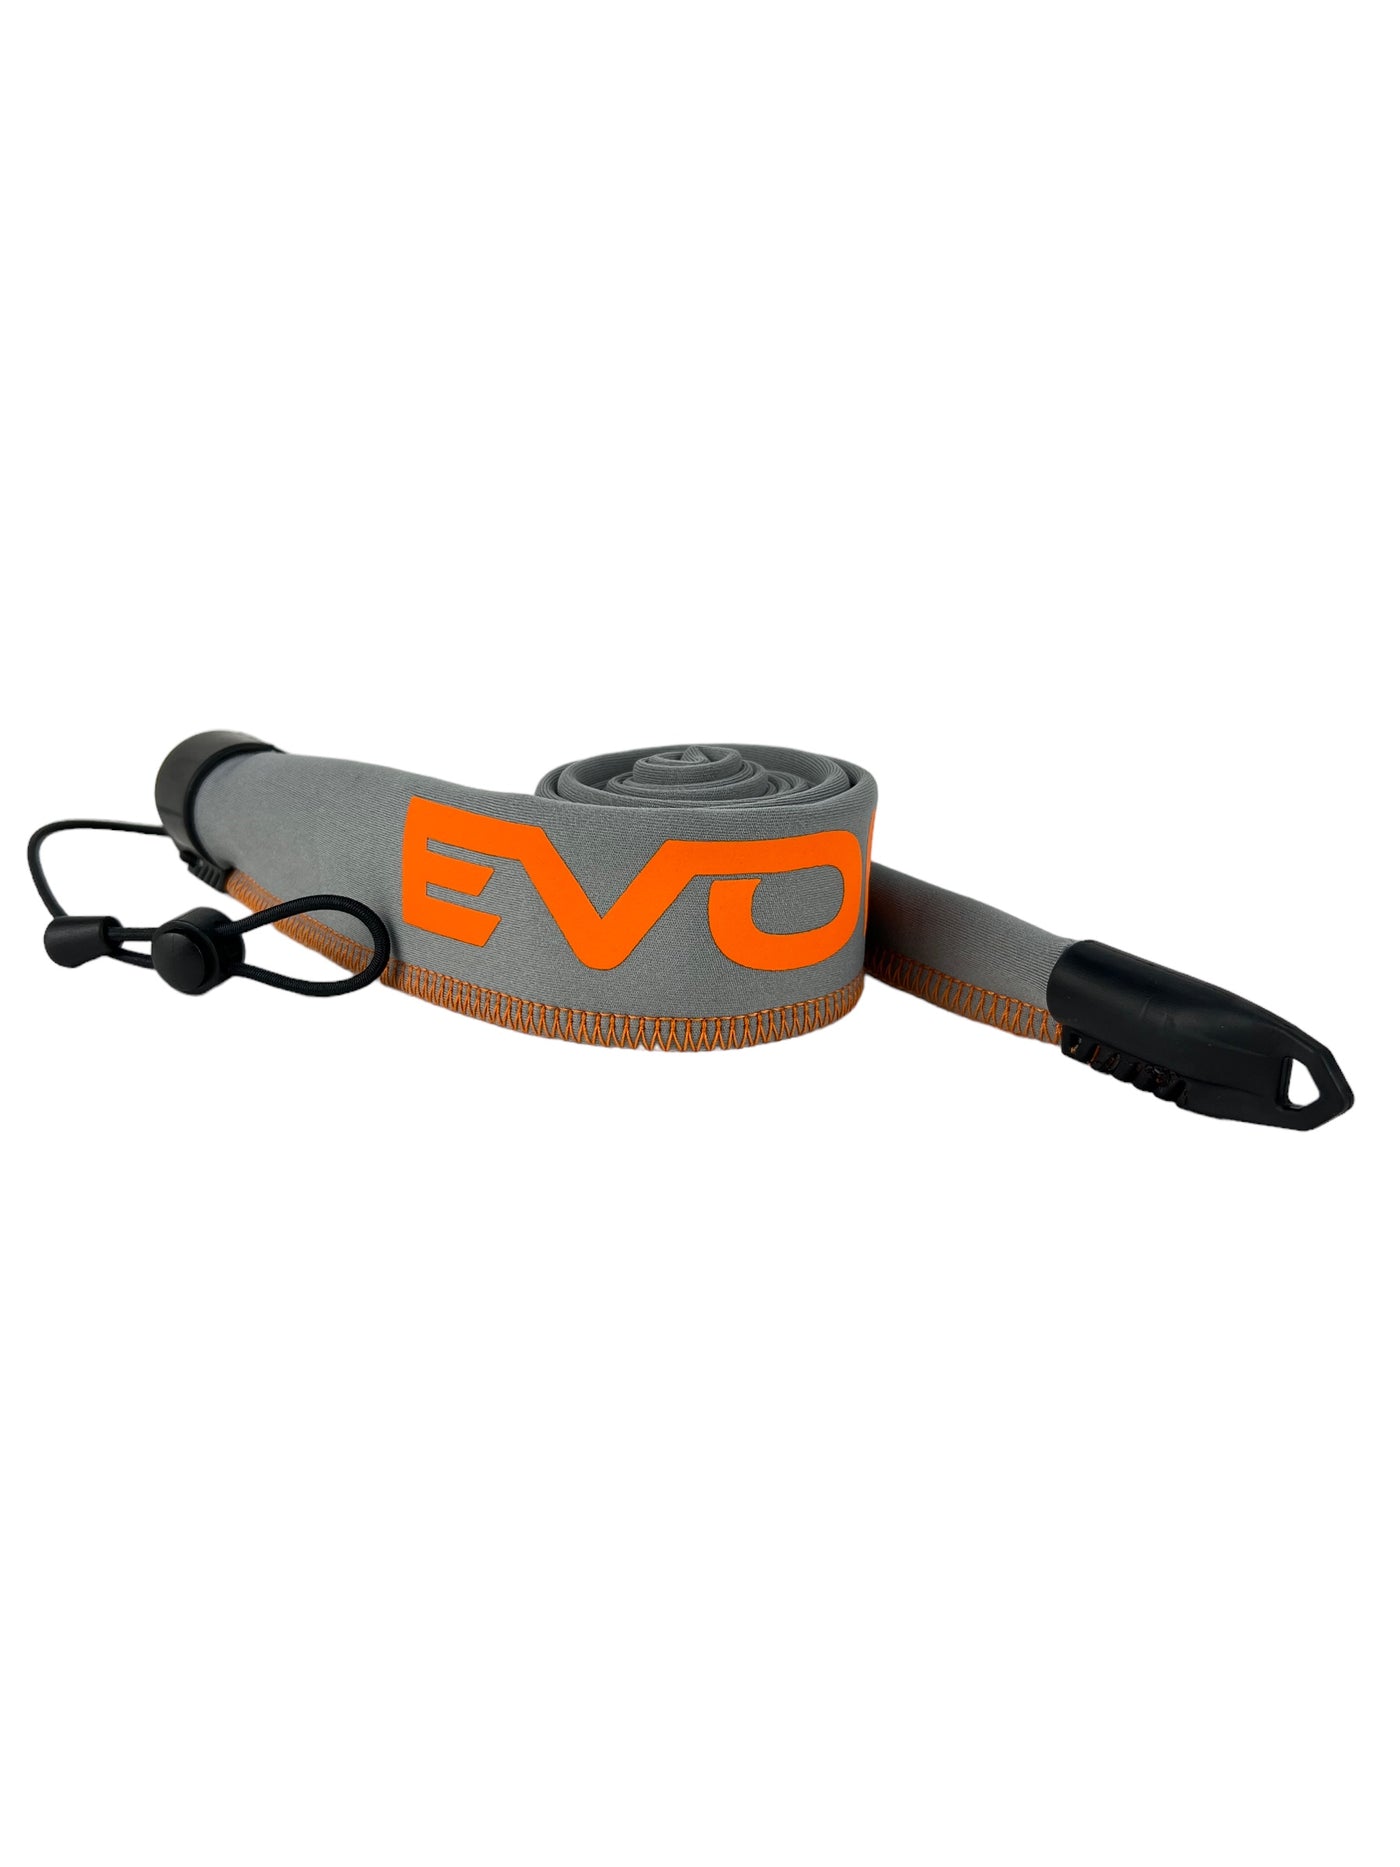 What should we call this Custom Purple and Orange Evolv Rod Sleeve